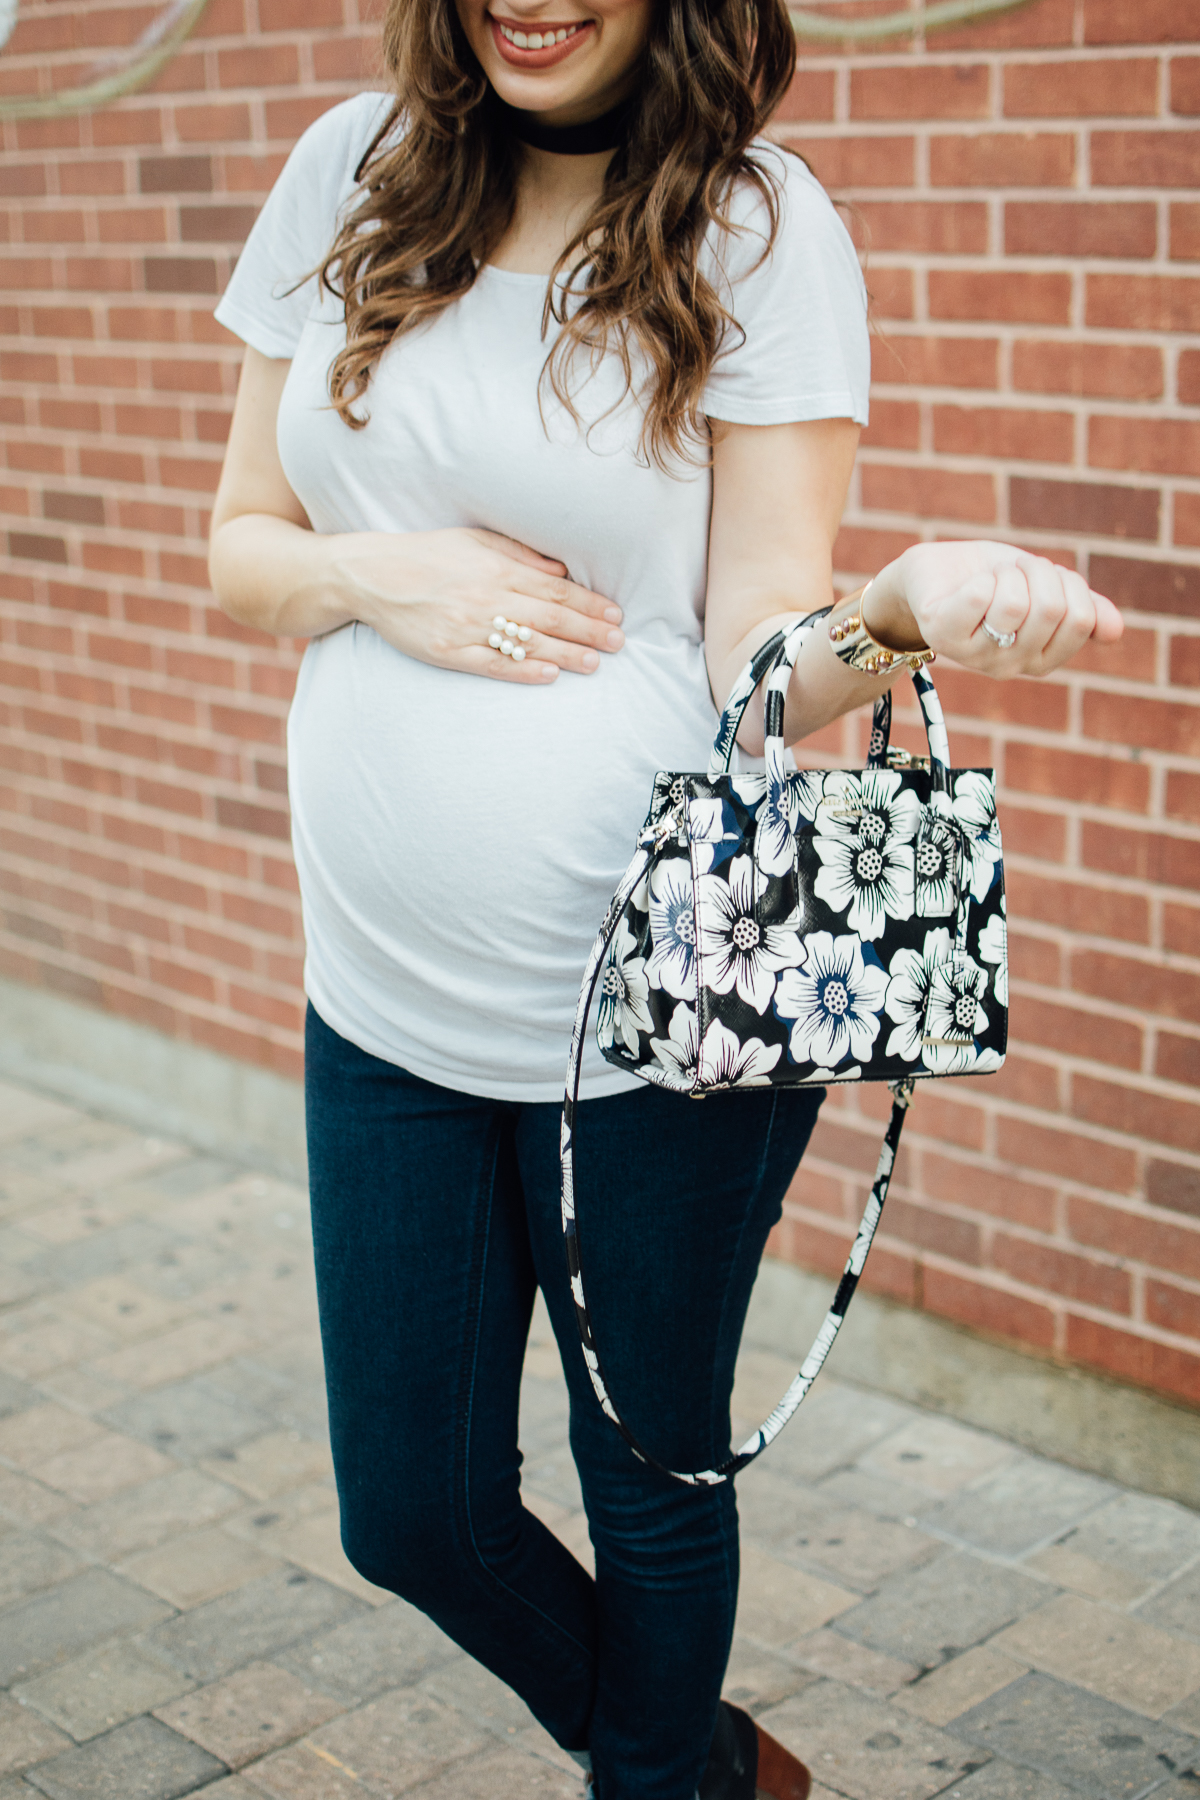 Texas fashion blogger Lone Star Looking Glass shares maternity outfit inspiration in a white tee, jeans and a Kate Spade Floral Handbag.